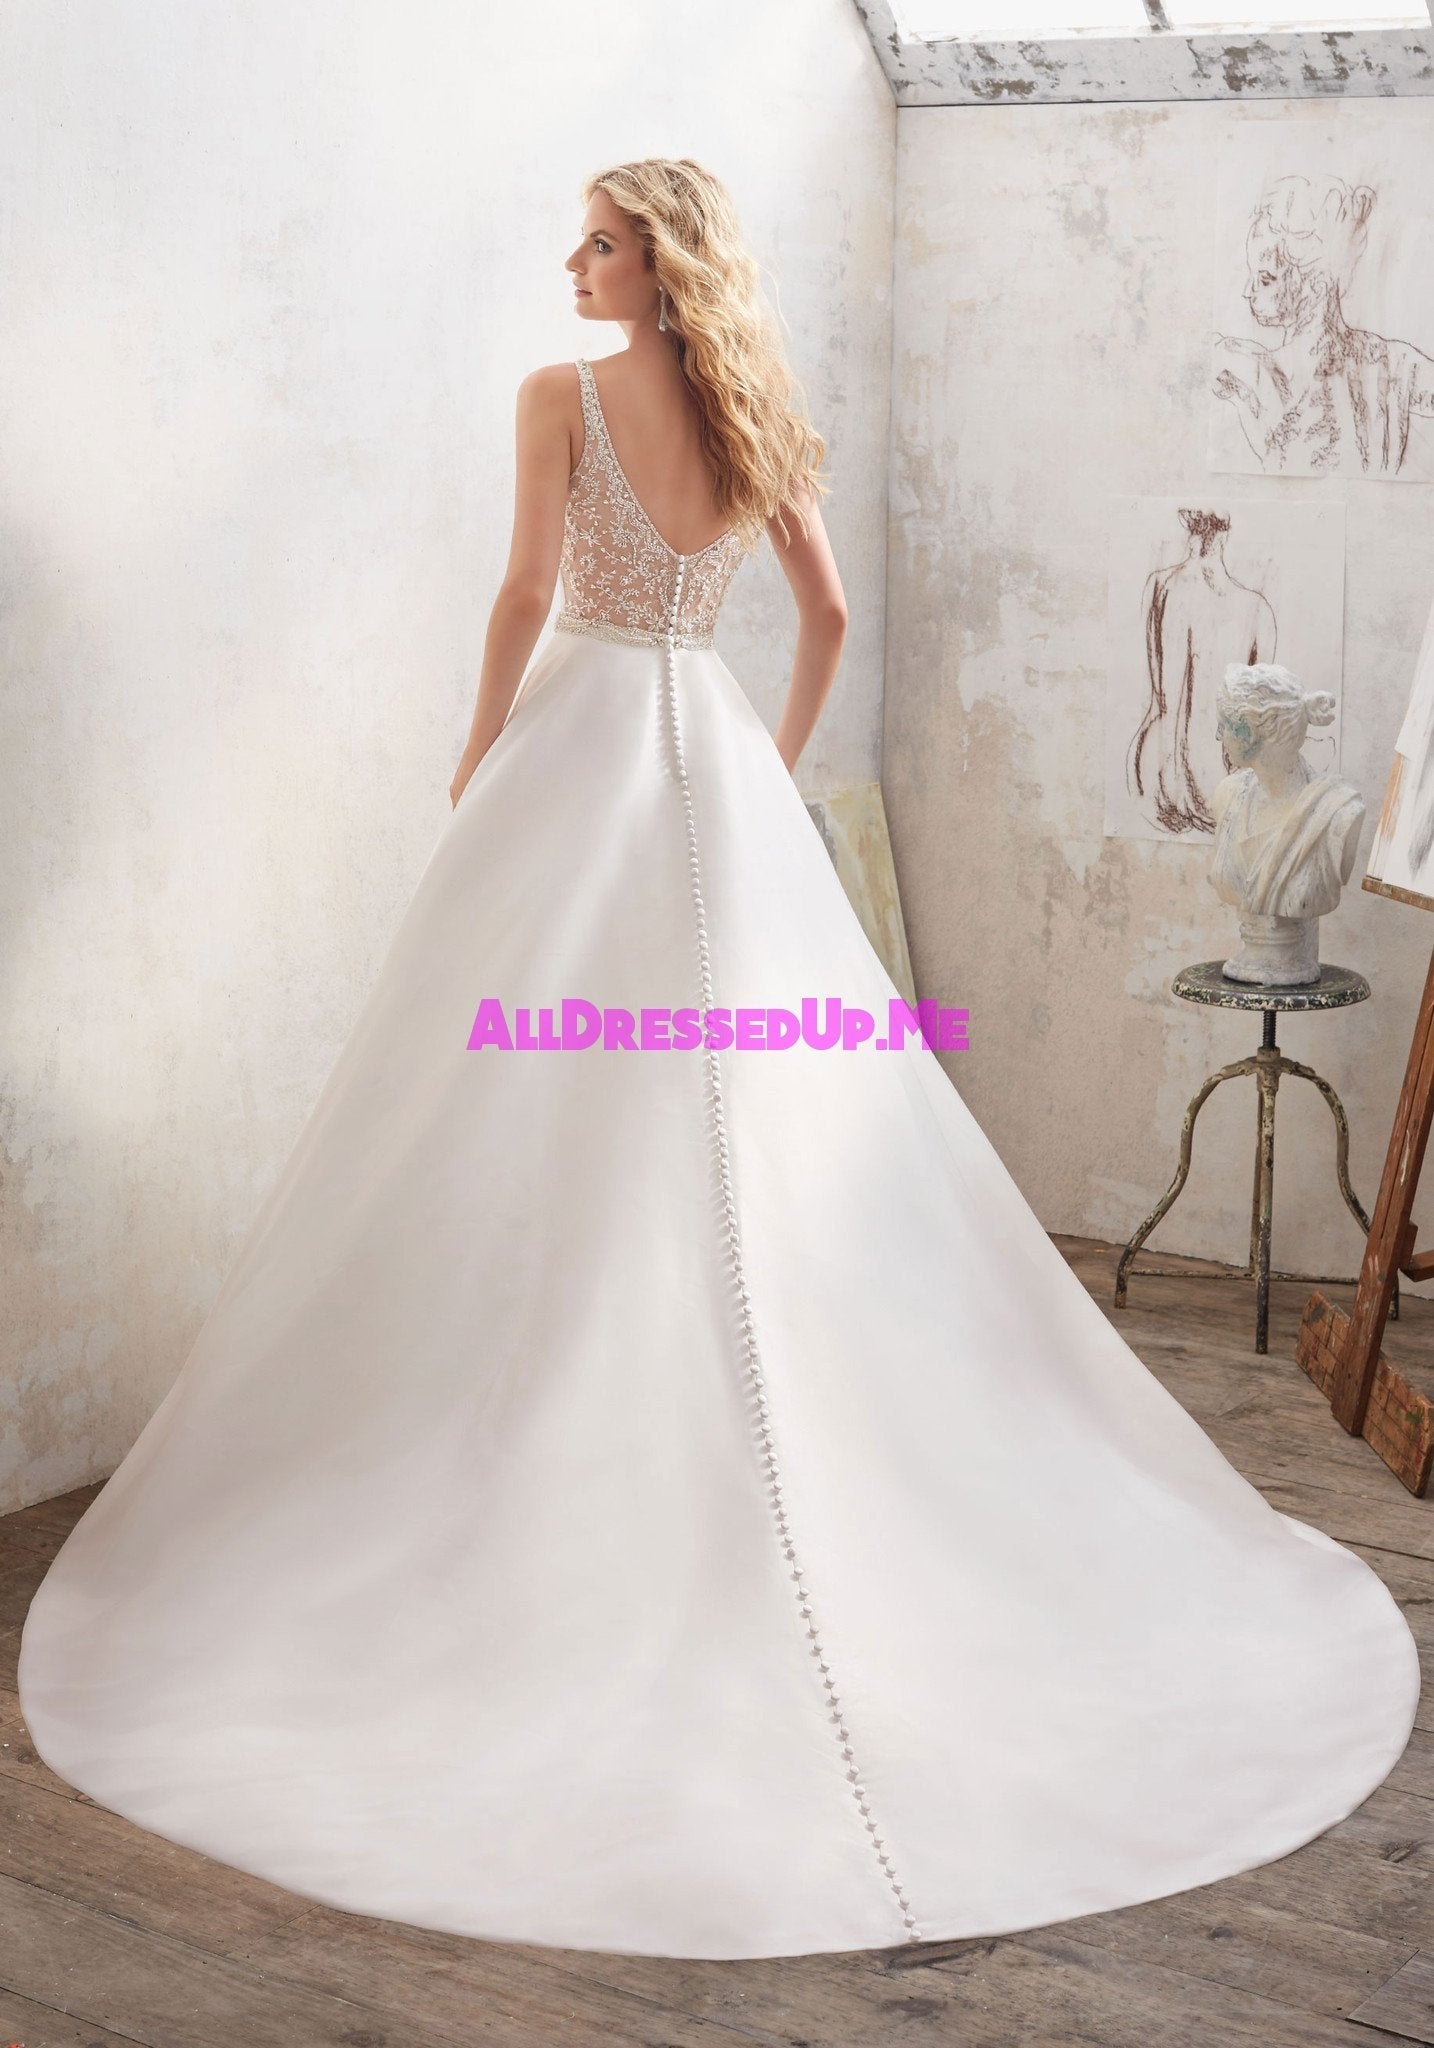 Morilee - Maribella - 8123 - Cheron's Bridal, Wedding Gown - Morilee Line - - Wedding Gowns Dresses Chattanooga Hixson Shops Boutiques Tennessee TN Georgia GA MSRP Lowest Prices Sale Discount